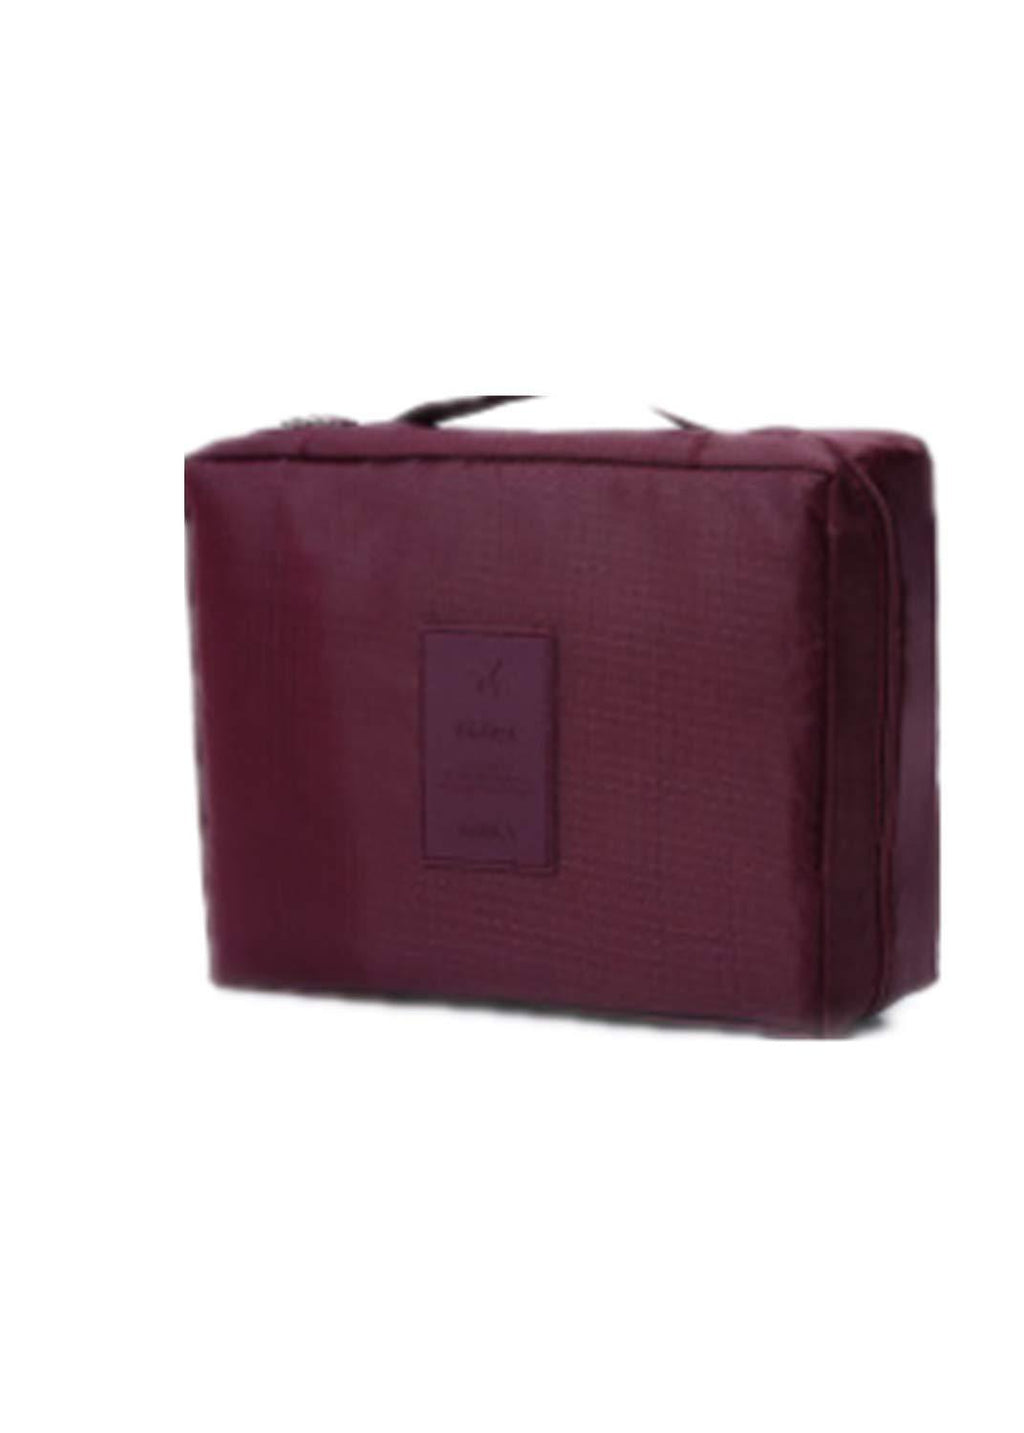 [Australia] - IOQSOF Korean Version Large Capacity Second Generation wash Simple Cosmetic Bag Multi-Function Travel Storage Pouch, Red Wine 